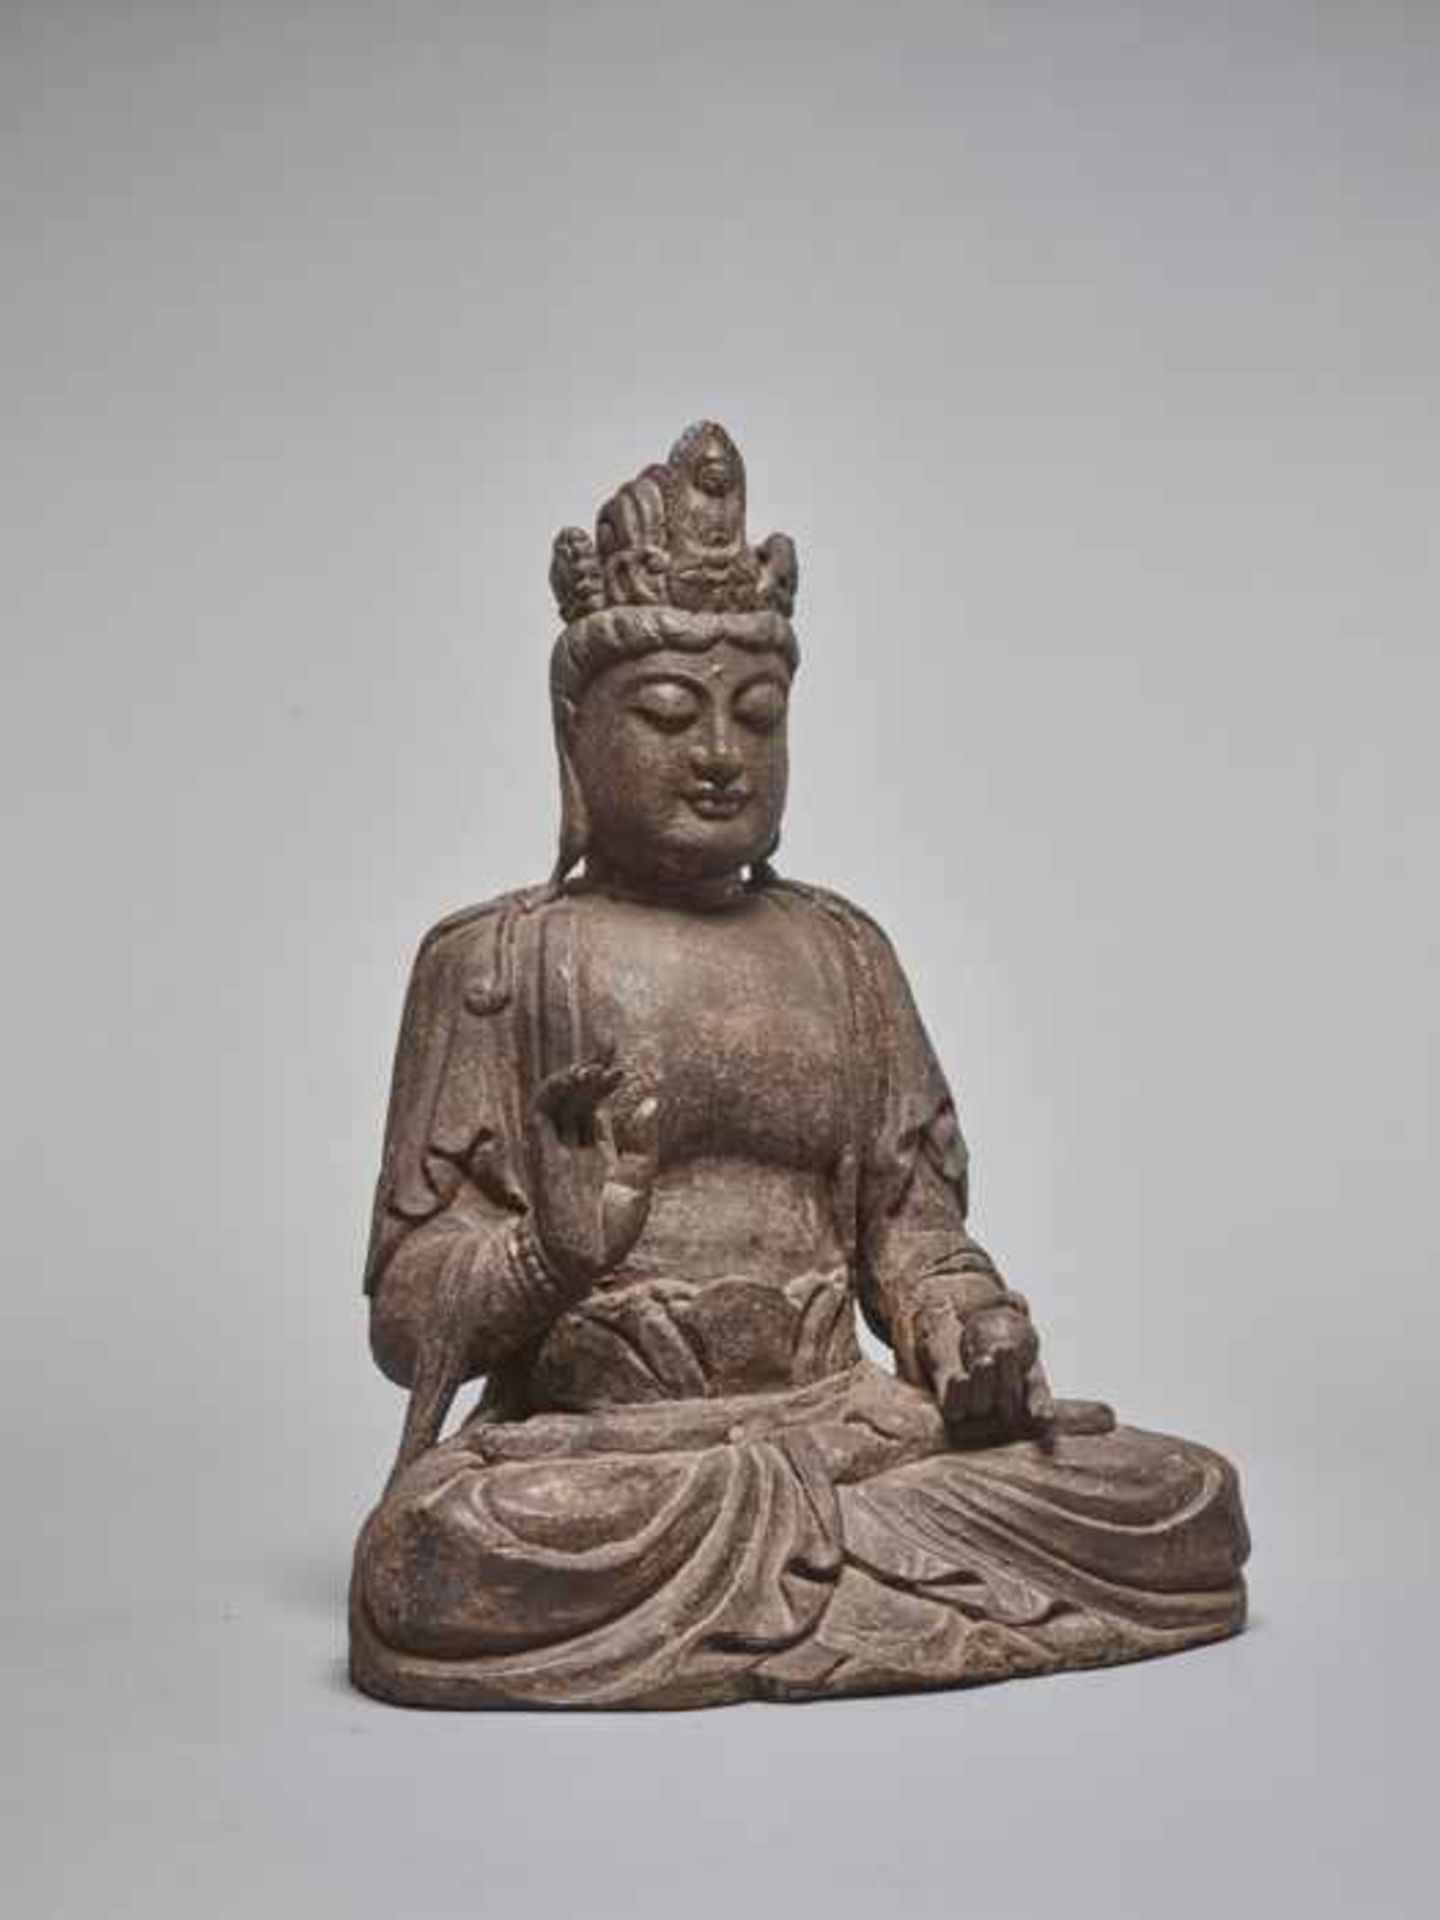 A LACQUERED WOODEN STATUE OF A GUANYIN, MING DYNASTY Carved wood with greyish lacquer coating. - Image 5 of 6